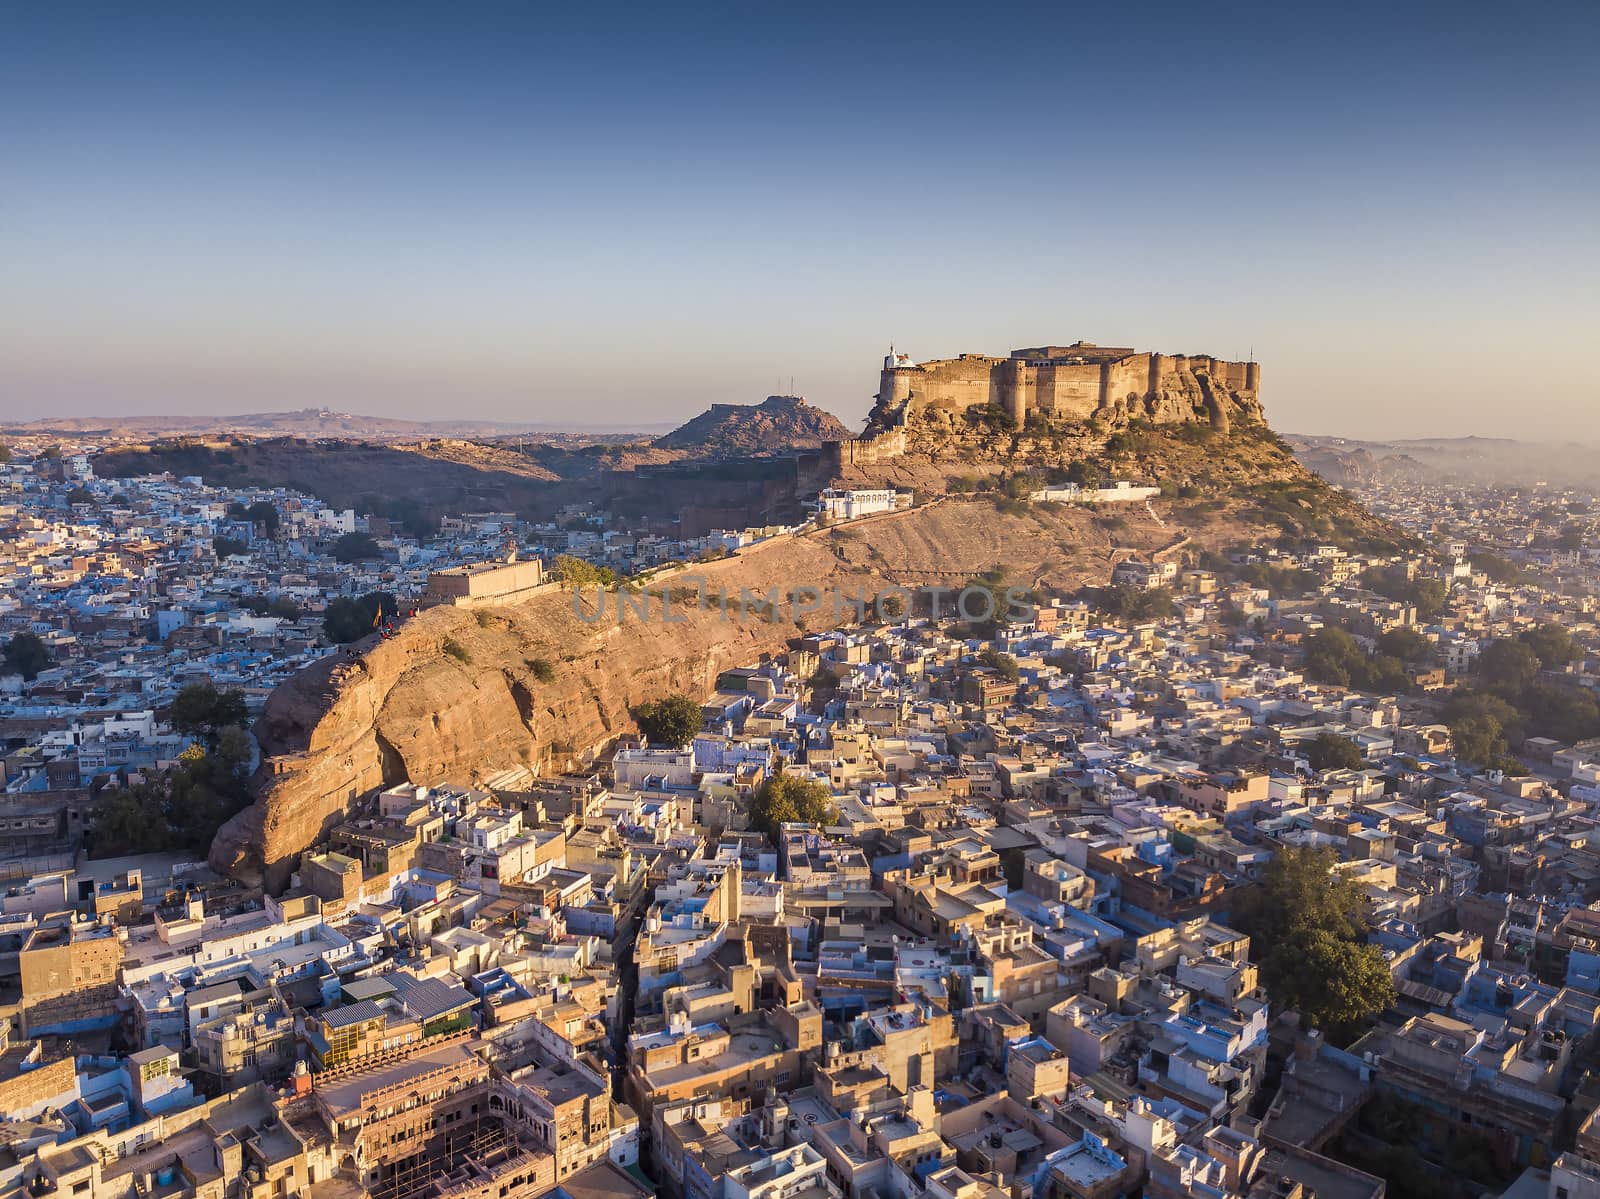 Aerial view of Mehrangarh Fort at sunset sits above the 'Blue City' Jodhpur, Rajasthan State India.